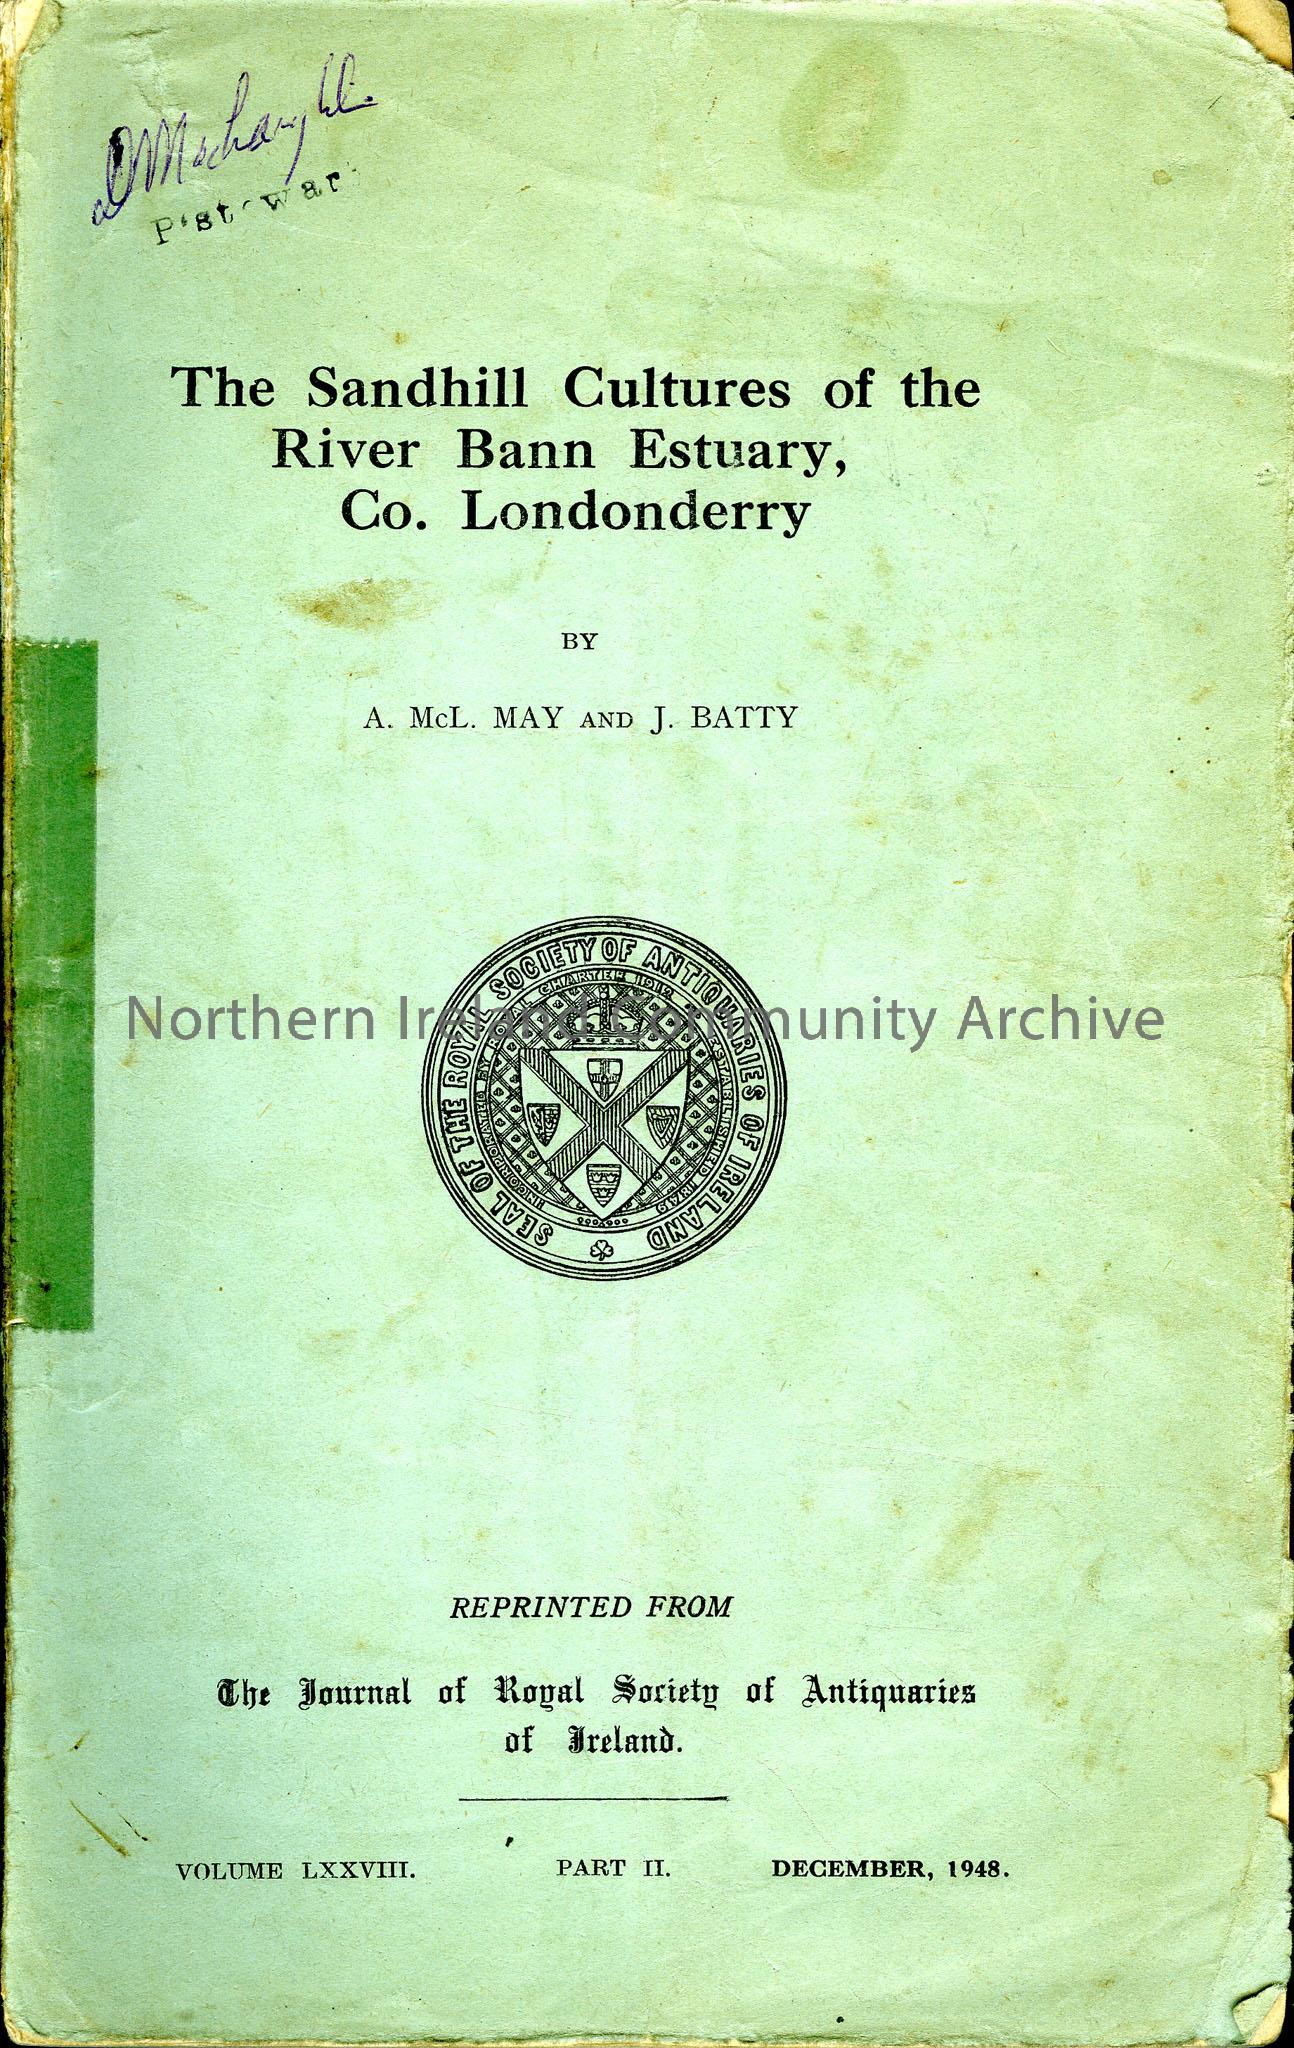 The Sandhill Cultures of the River Bann Estuary, Co.Londonderry